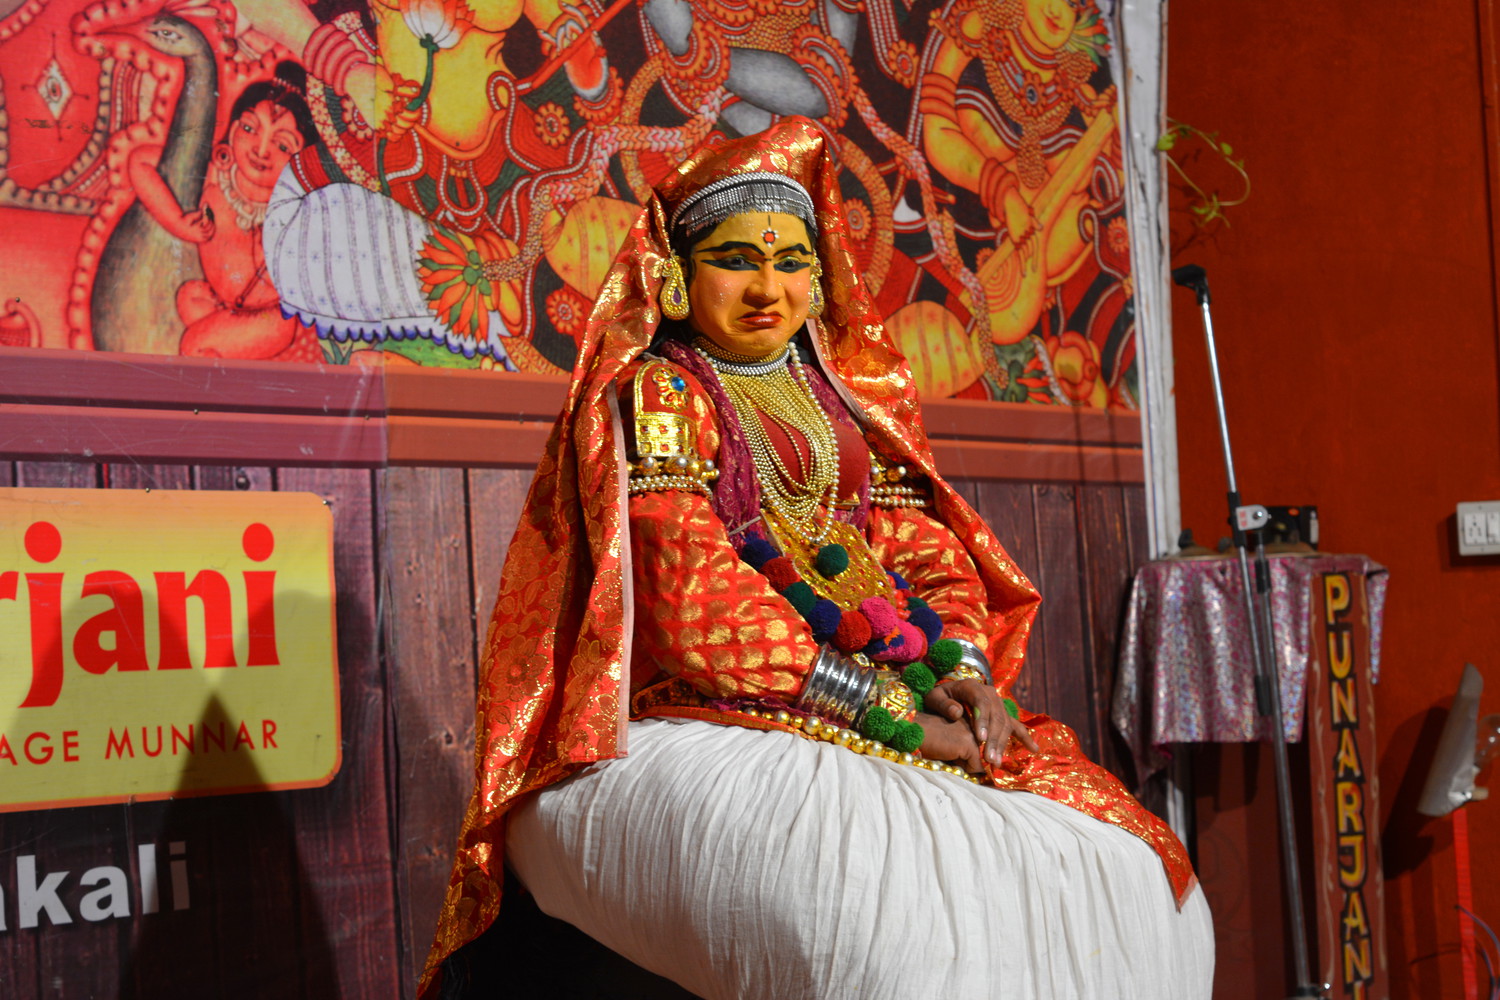 A female Kathakali artist in red costume demonstrating disgust with her facial expressions while seated on a small stool